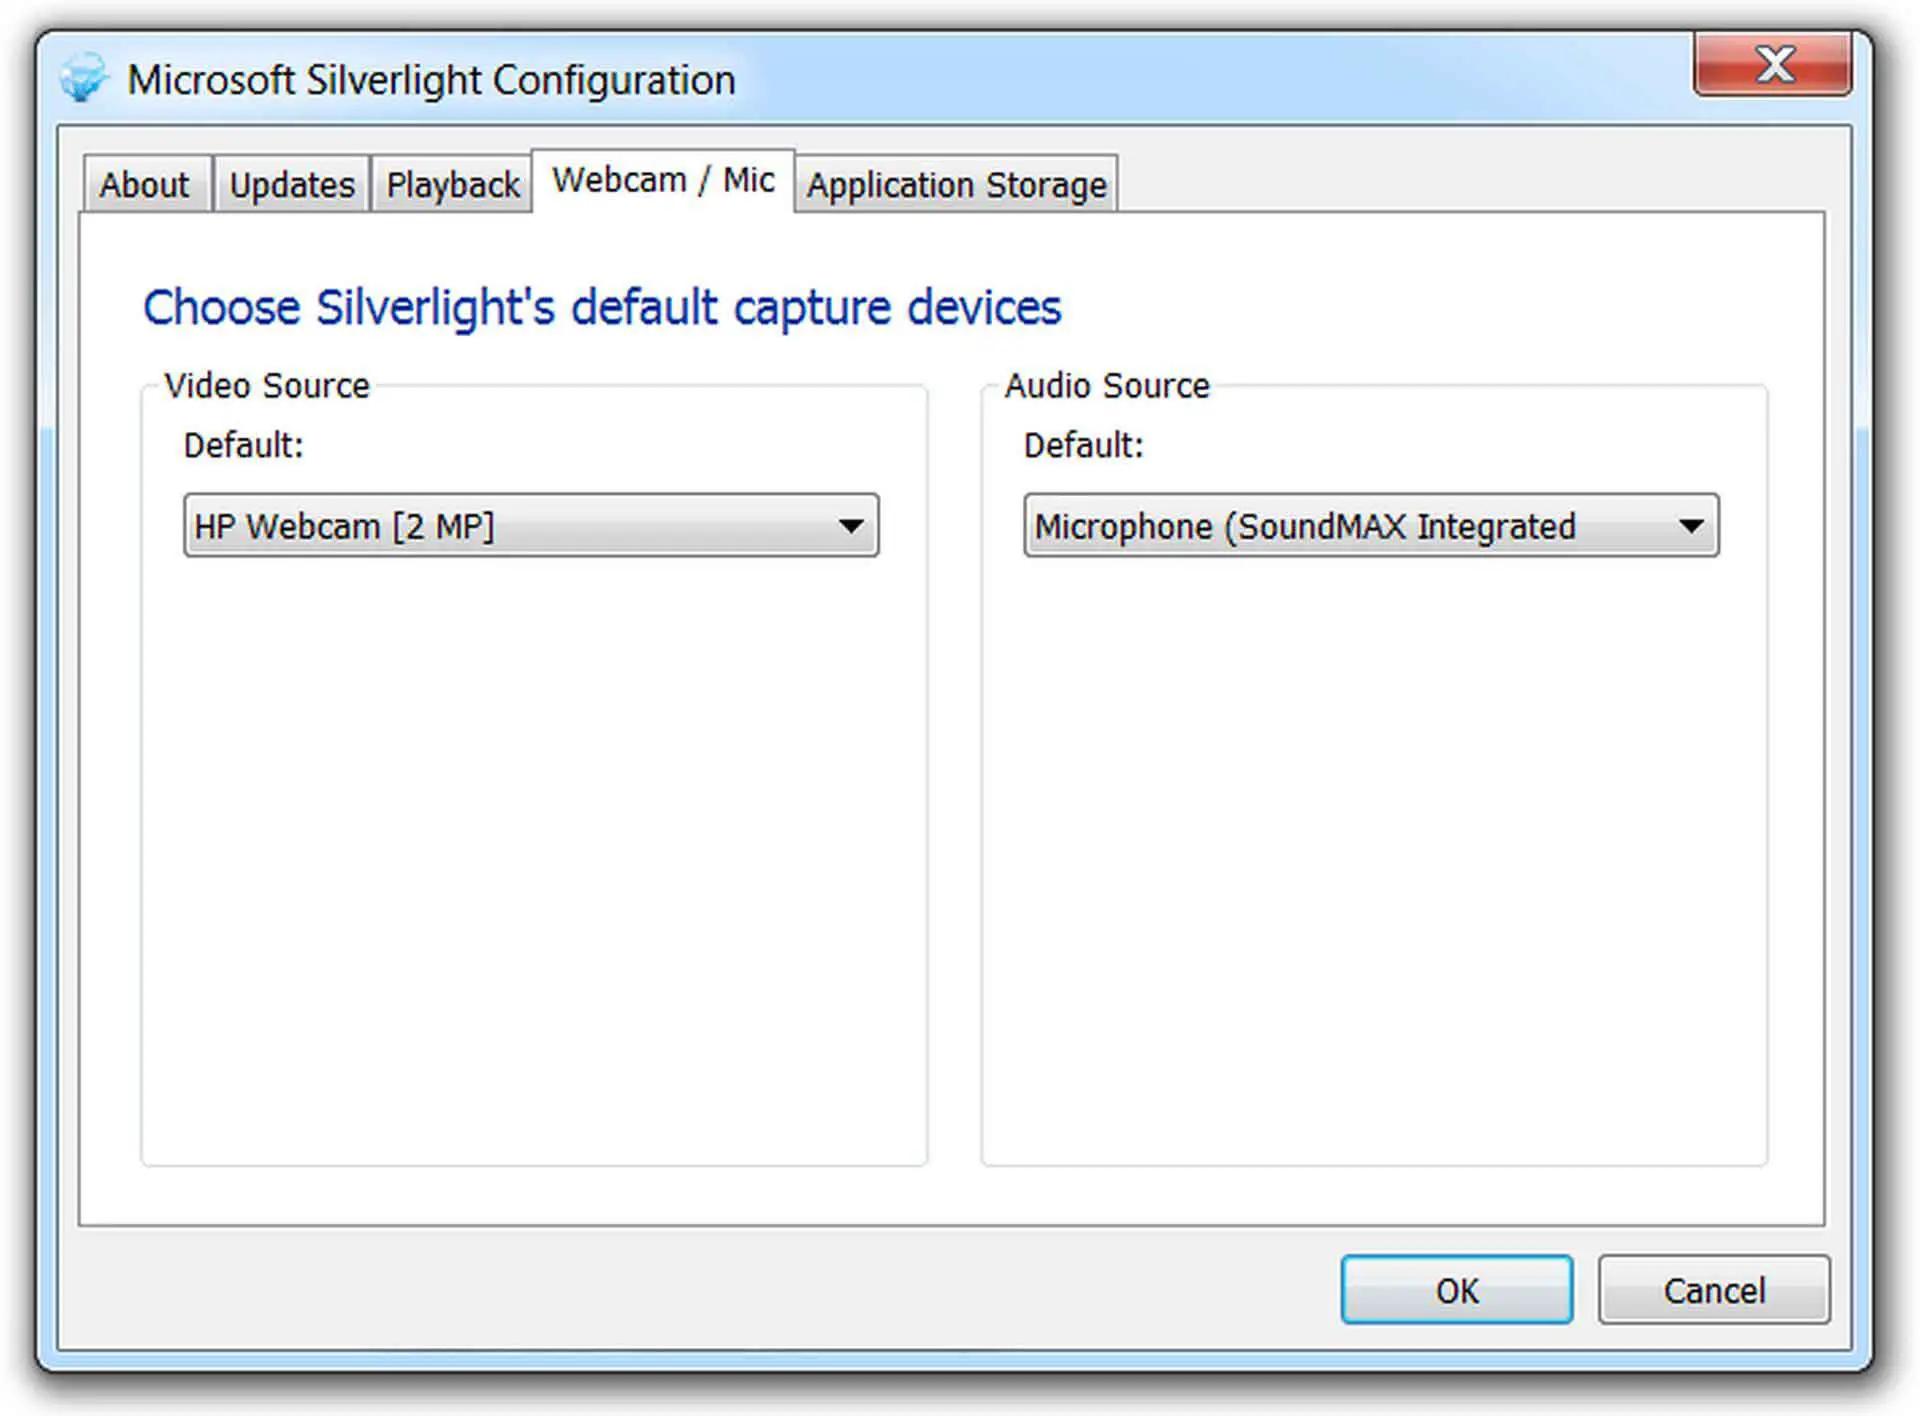 Template:Latest preview software release/Microsoft Silverlight